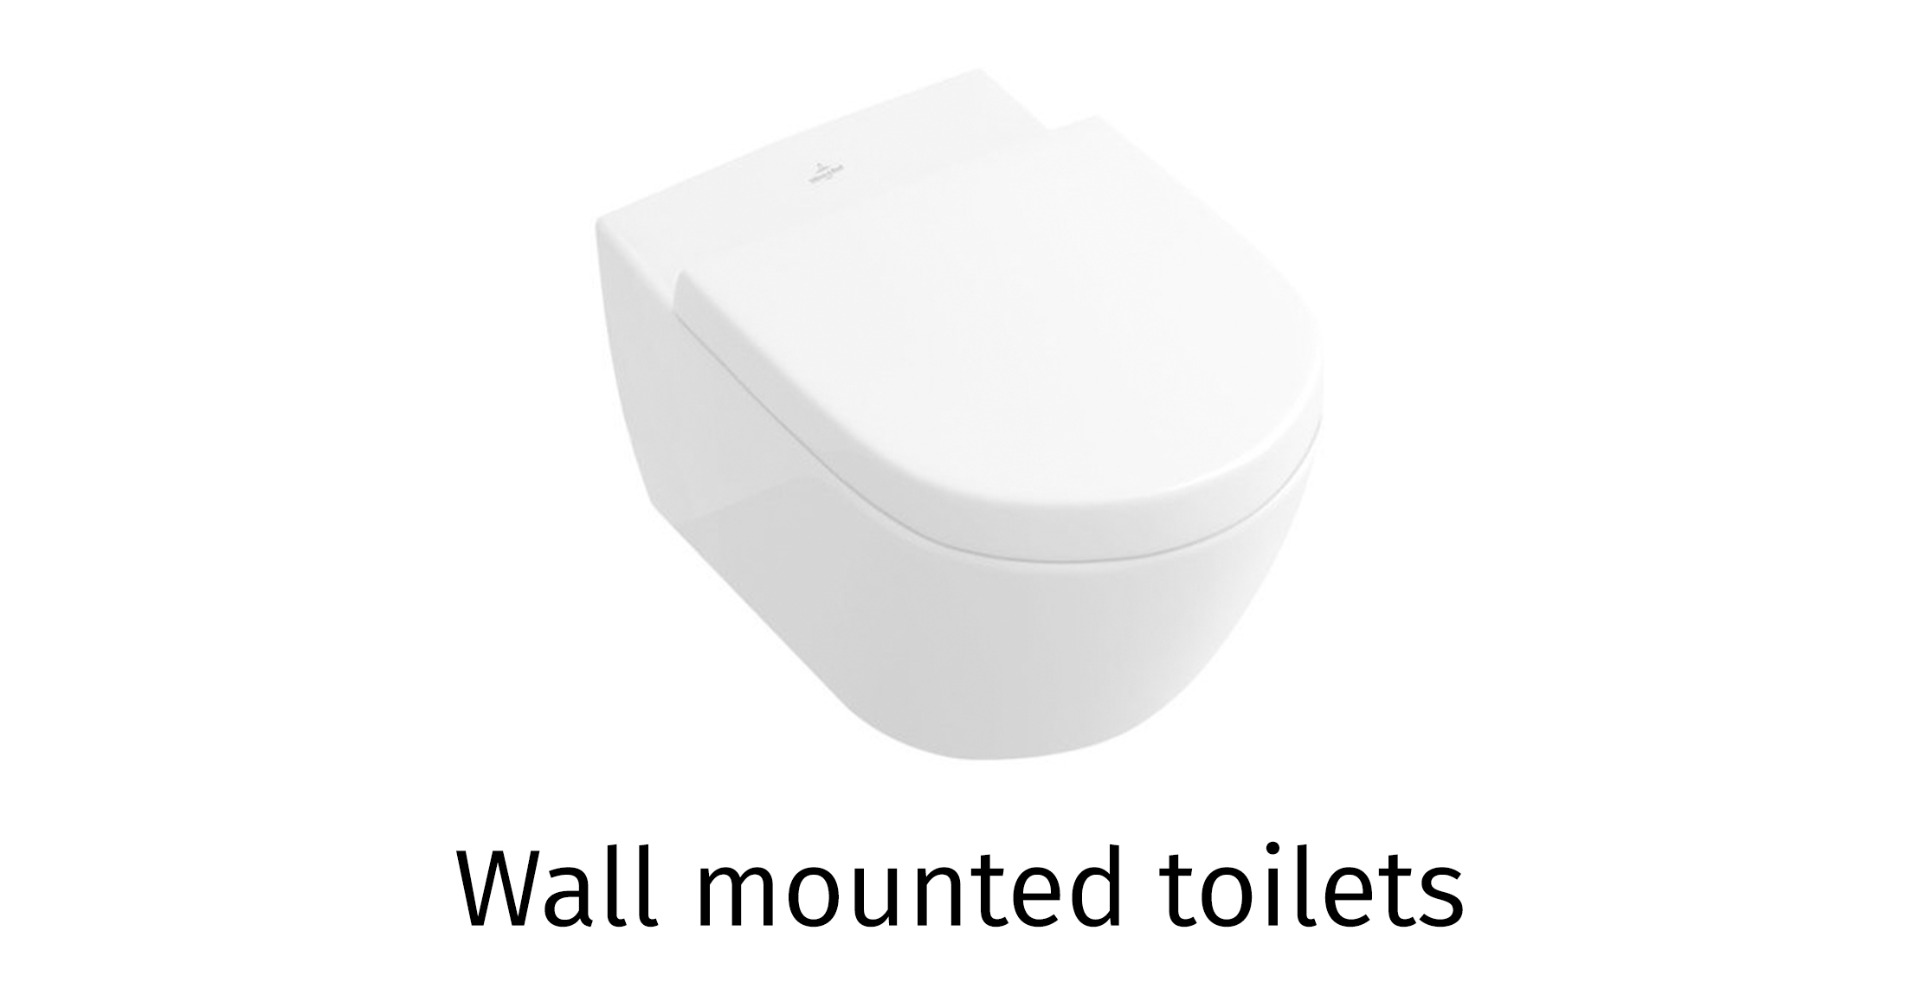 Wall mounted toilets